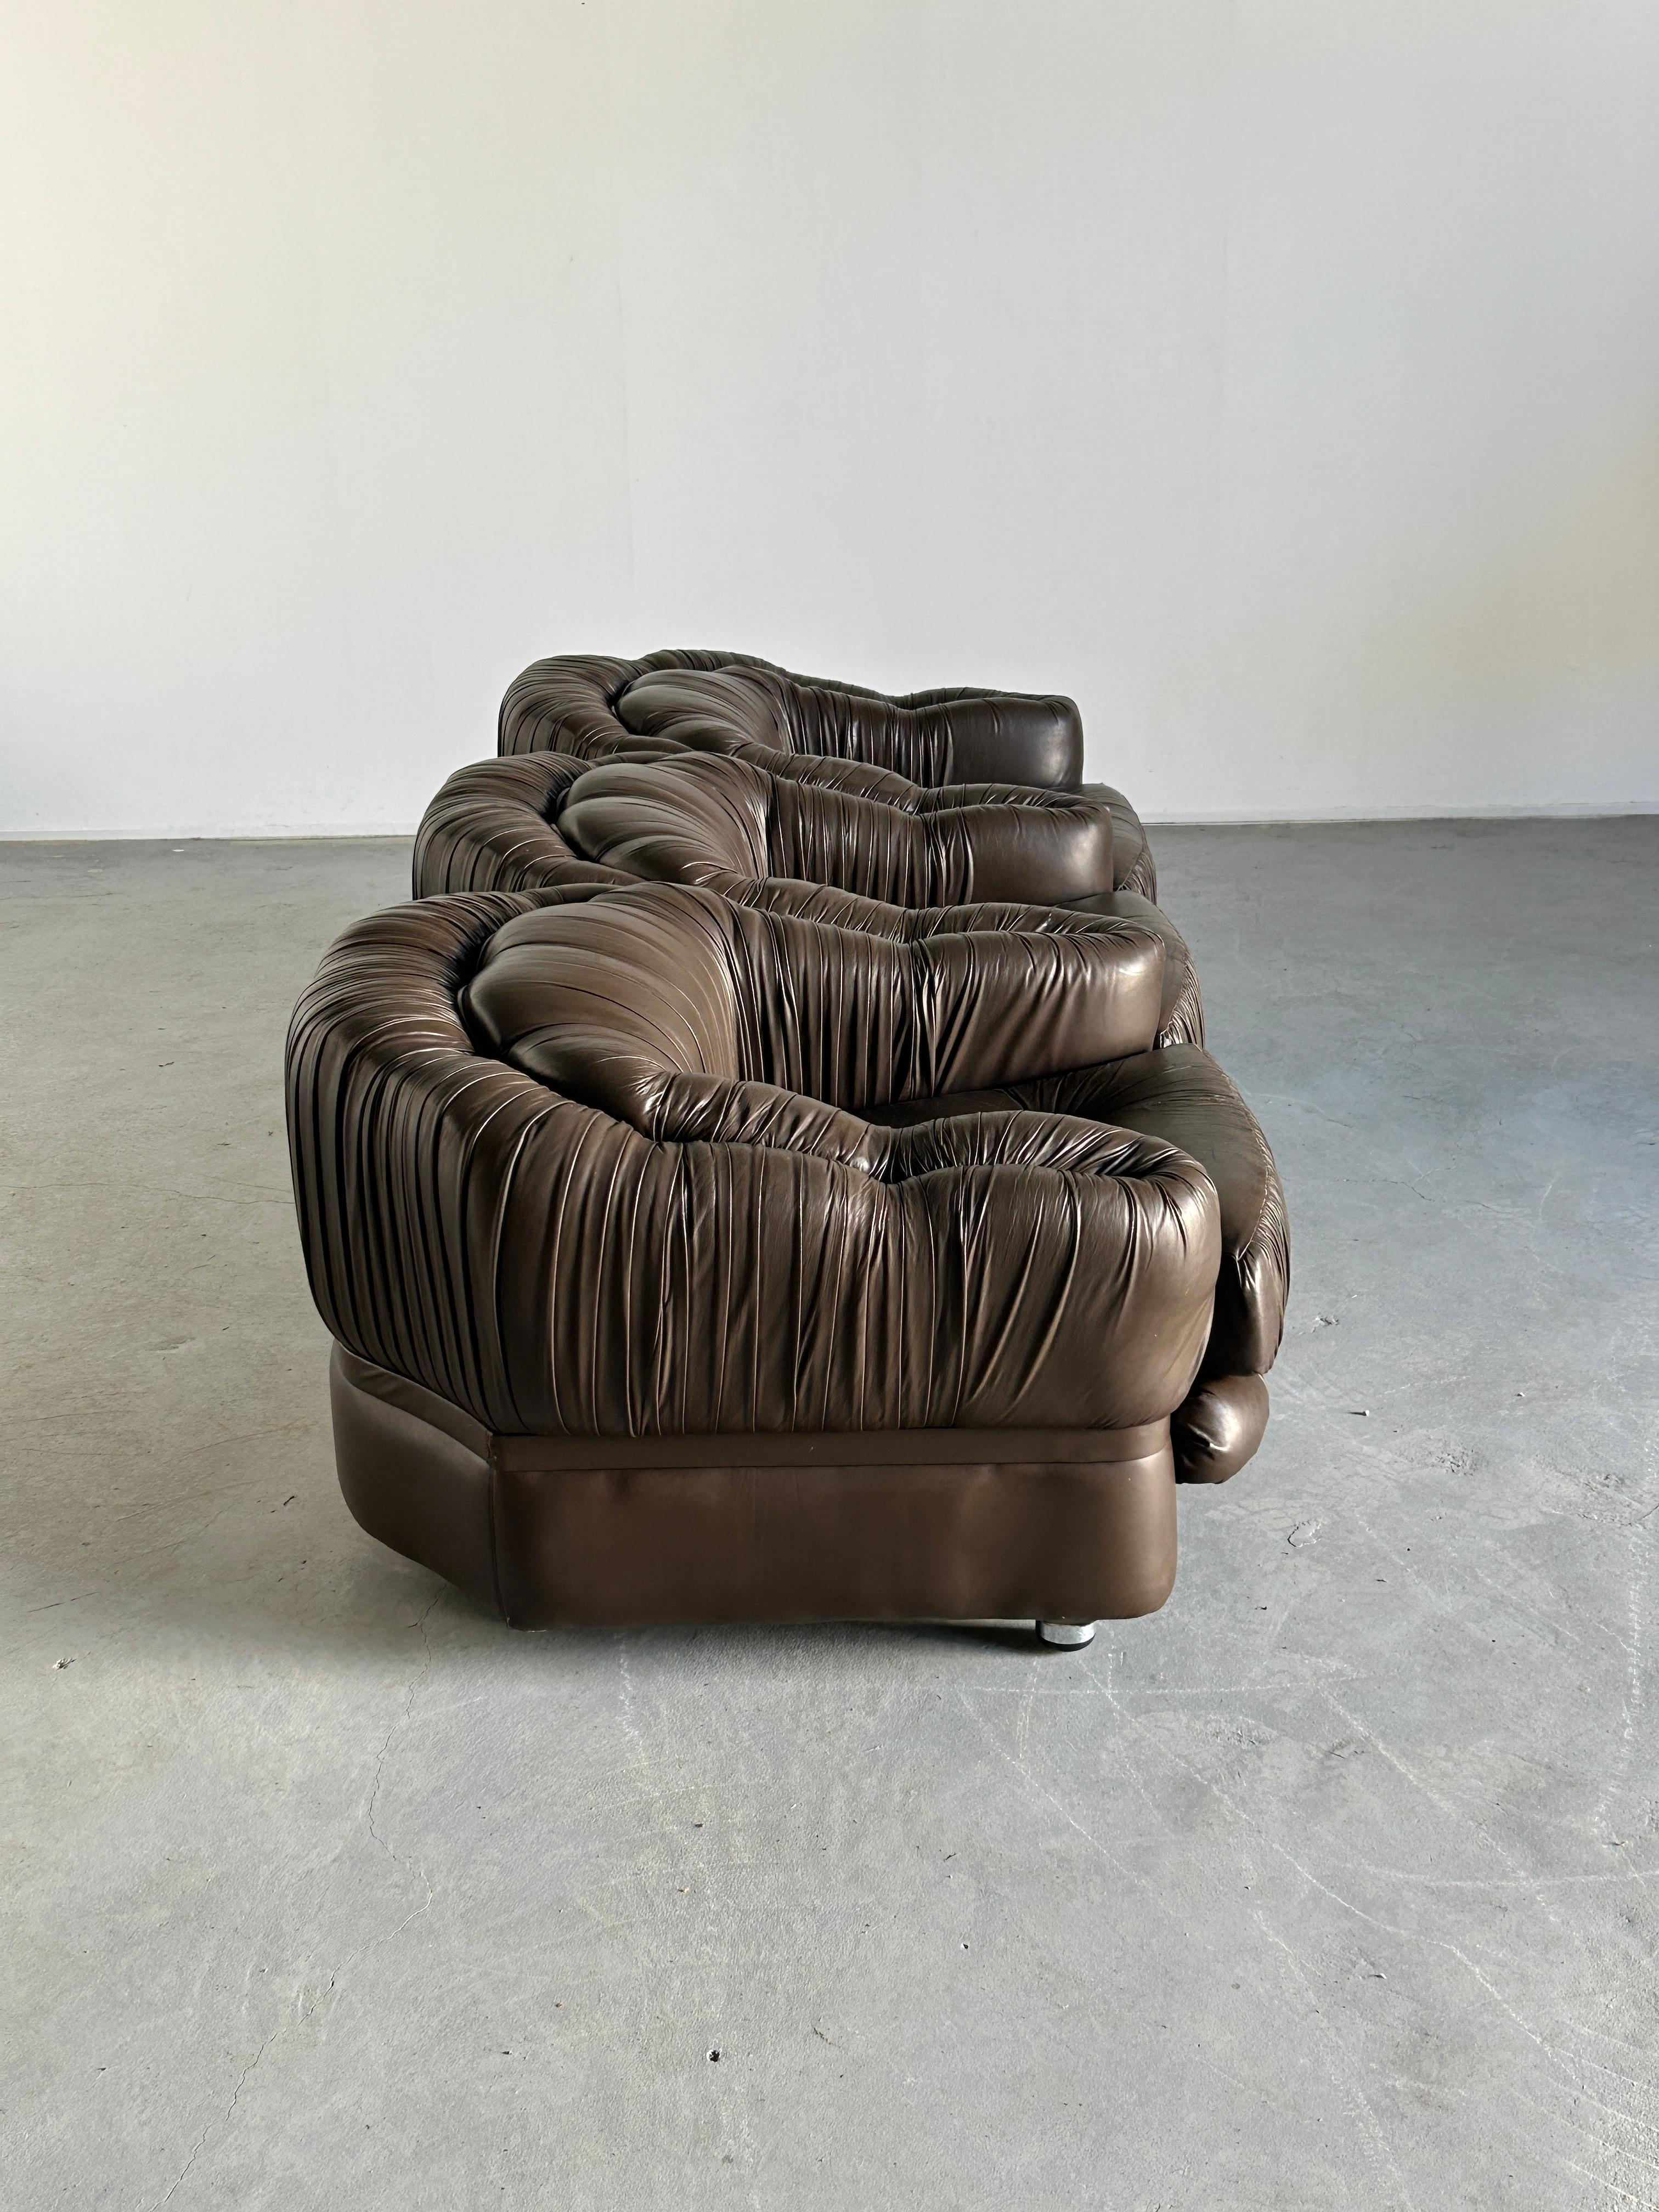 Metal Three-Seater Sofa in Dark Brown Leather by Axel Di Pietrobon, 1970s Italy For Sale